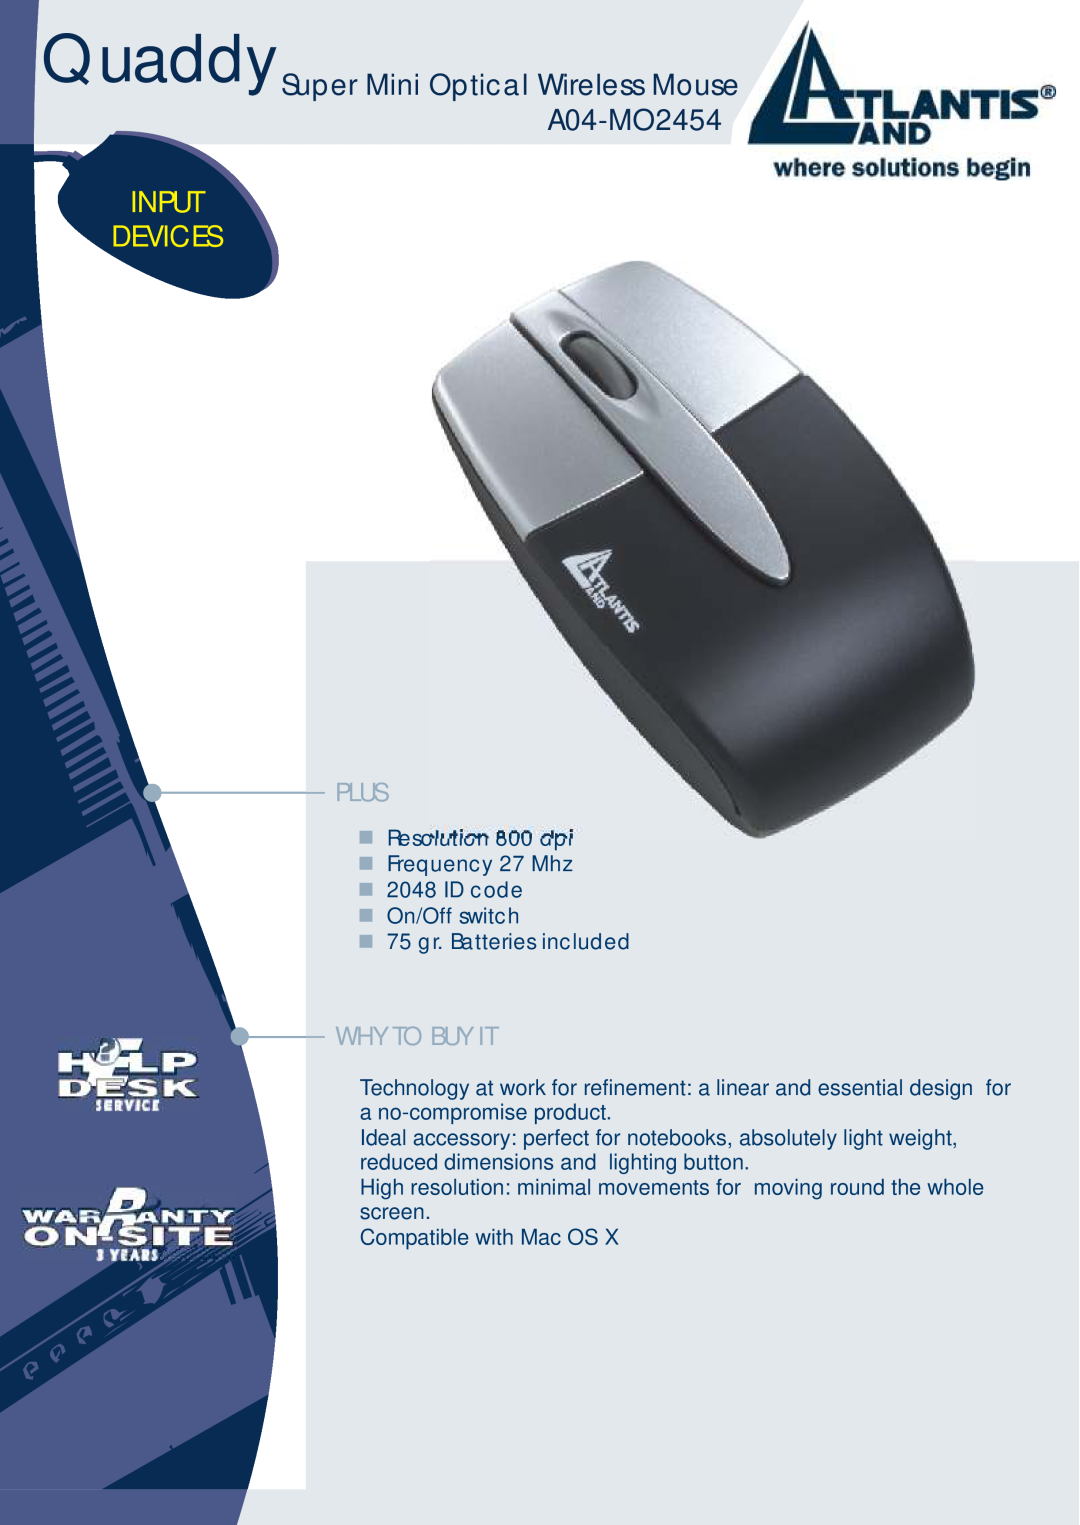 Atlantis Land dimensions QuaddySuper Mini Optical Wireless Mouse A04-MO2454, Plus, Why To Buy It, Input Devices 